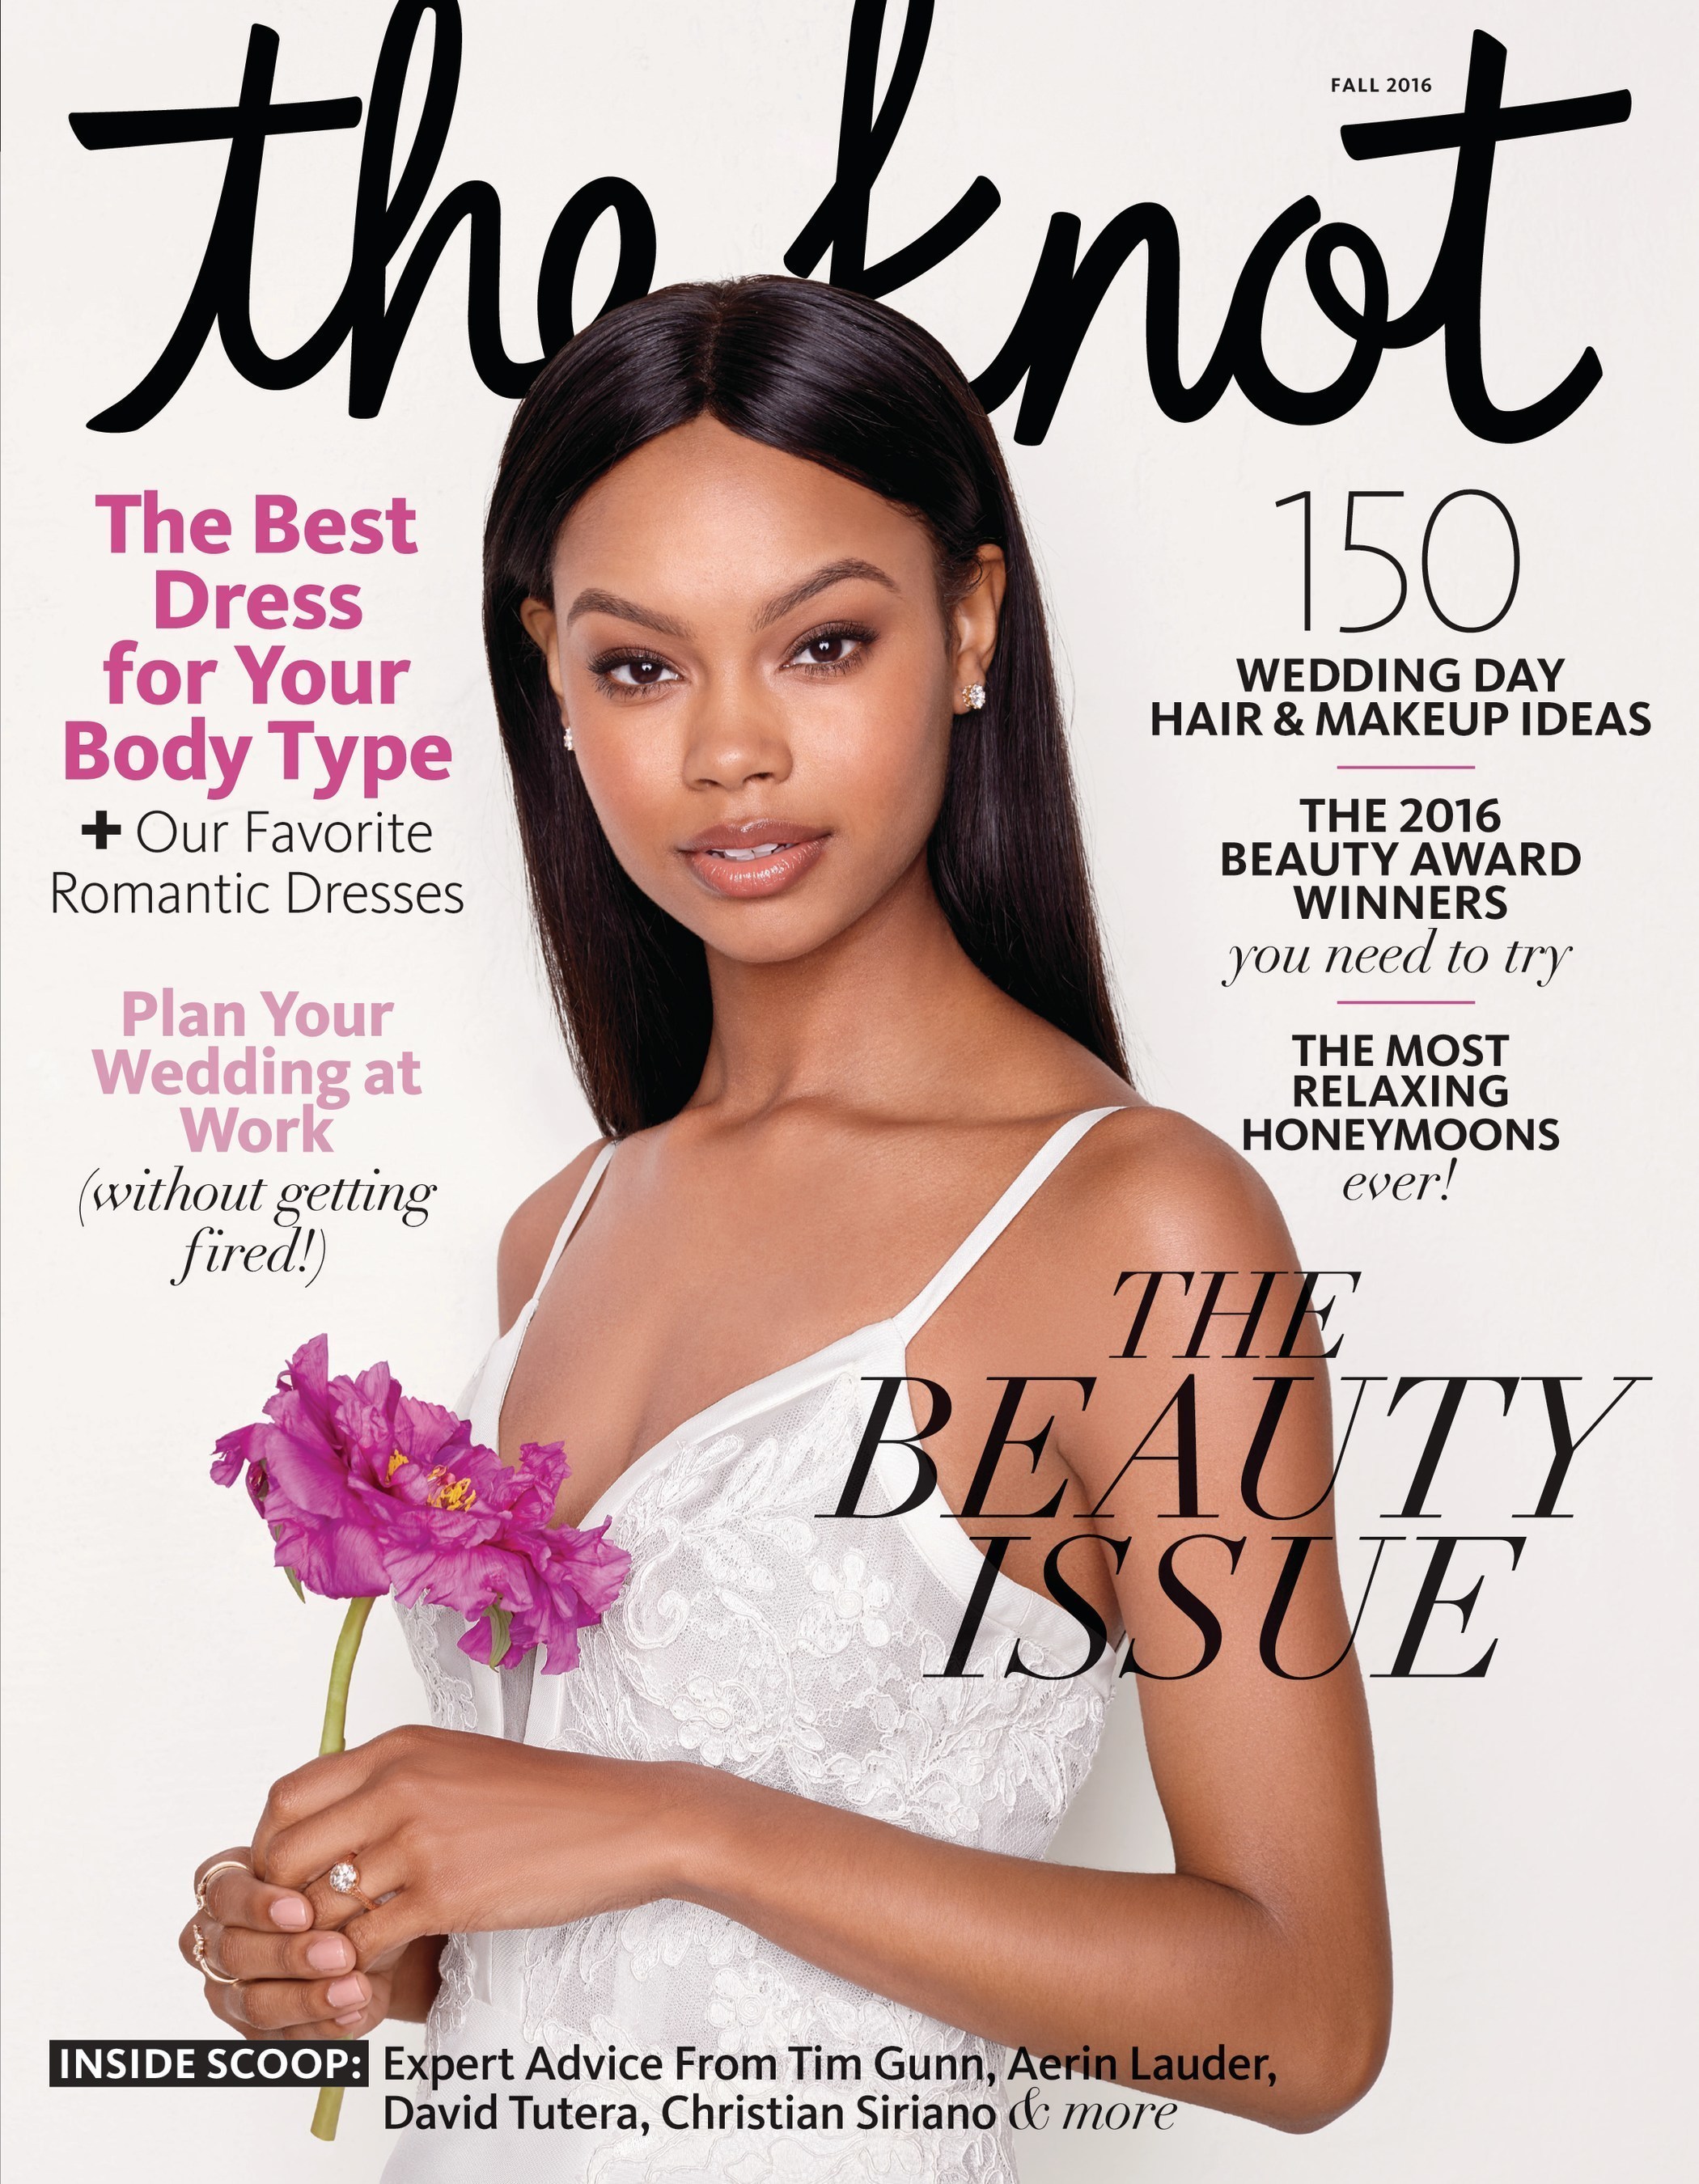 The Knot Beauty Issue, on newsstands August 29, features 50 award-winning beauty products hand-picked by The Knot editors and readers.